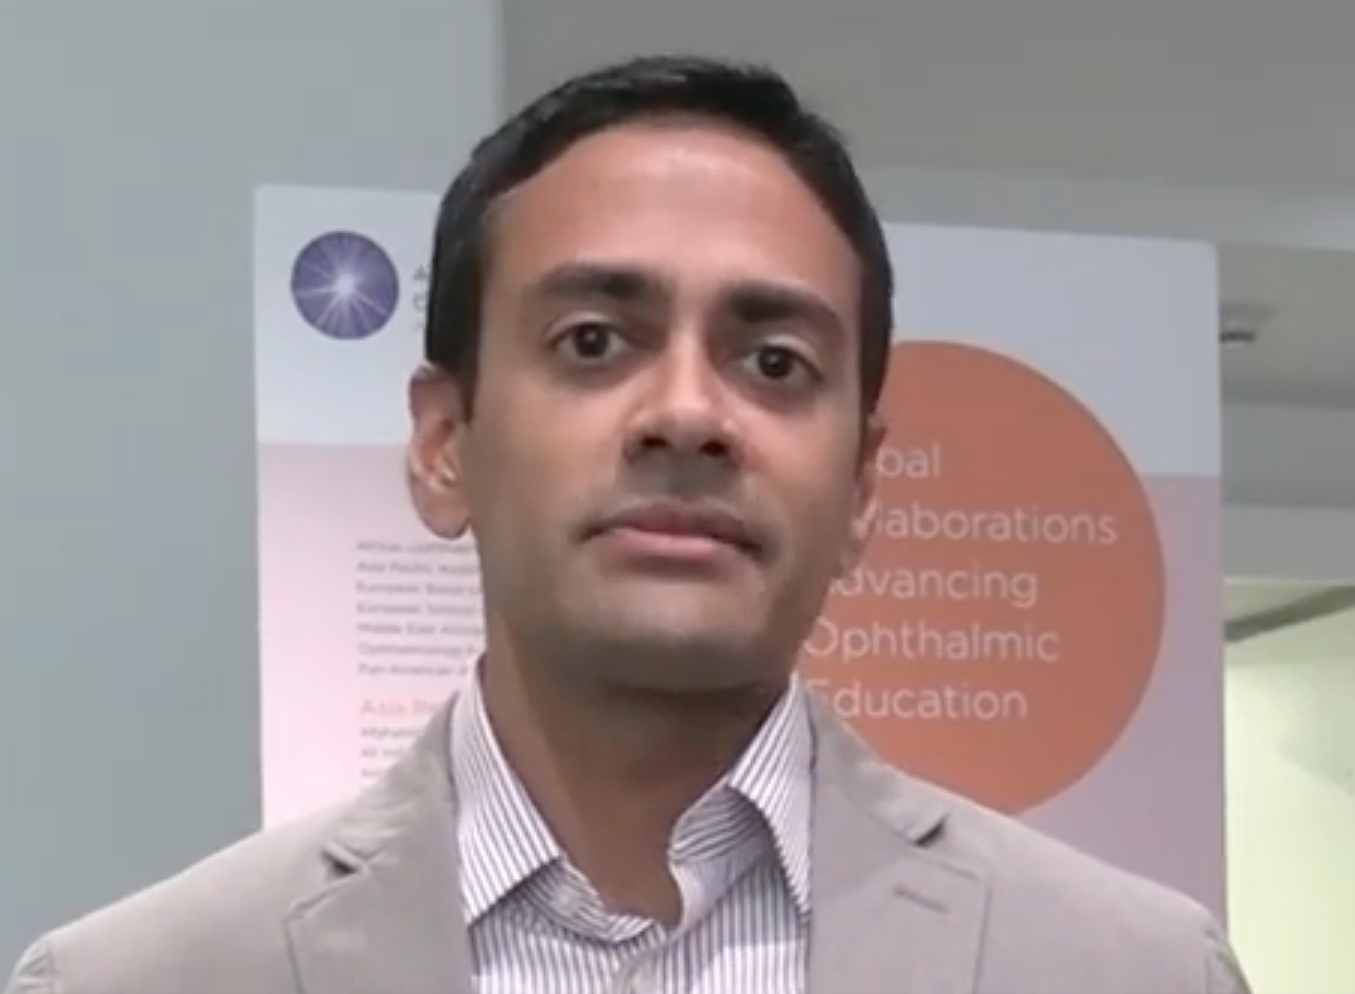 Swarup S Swaminathan, M.D., of University of Miami Discusses Social Vulnerability and Glaucoma